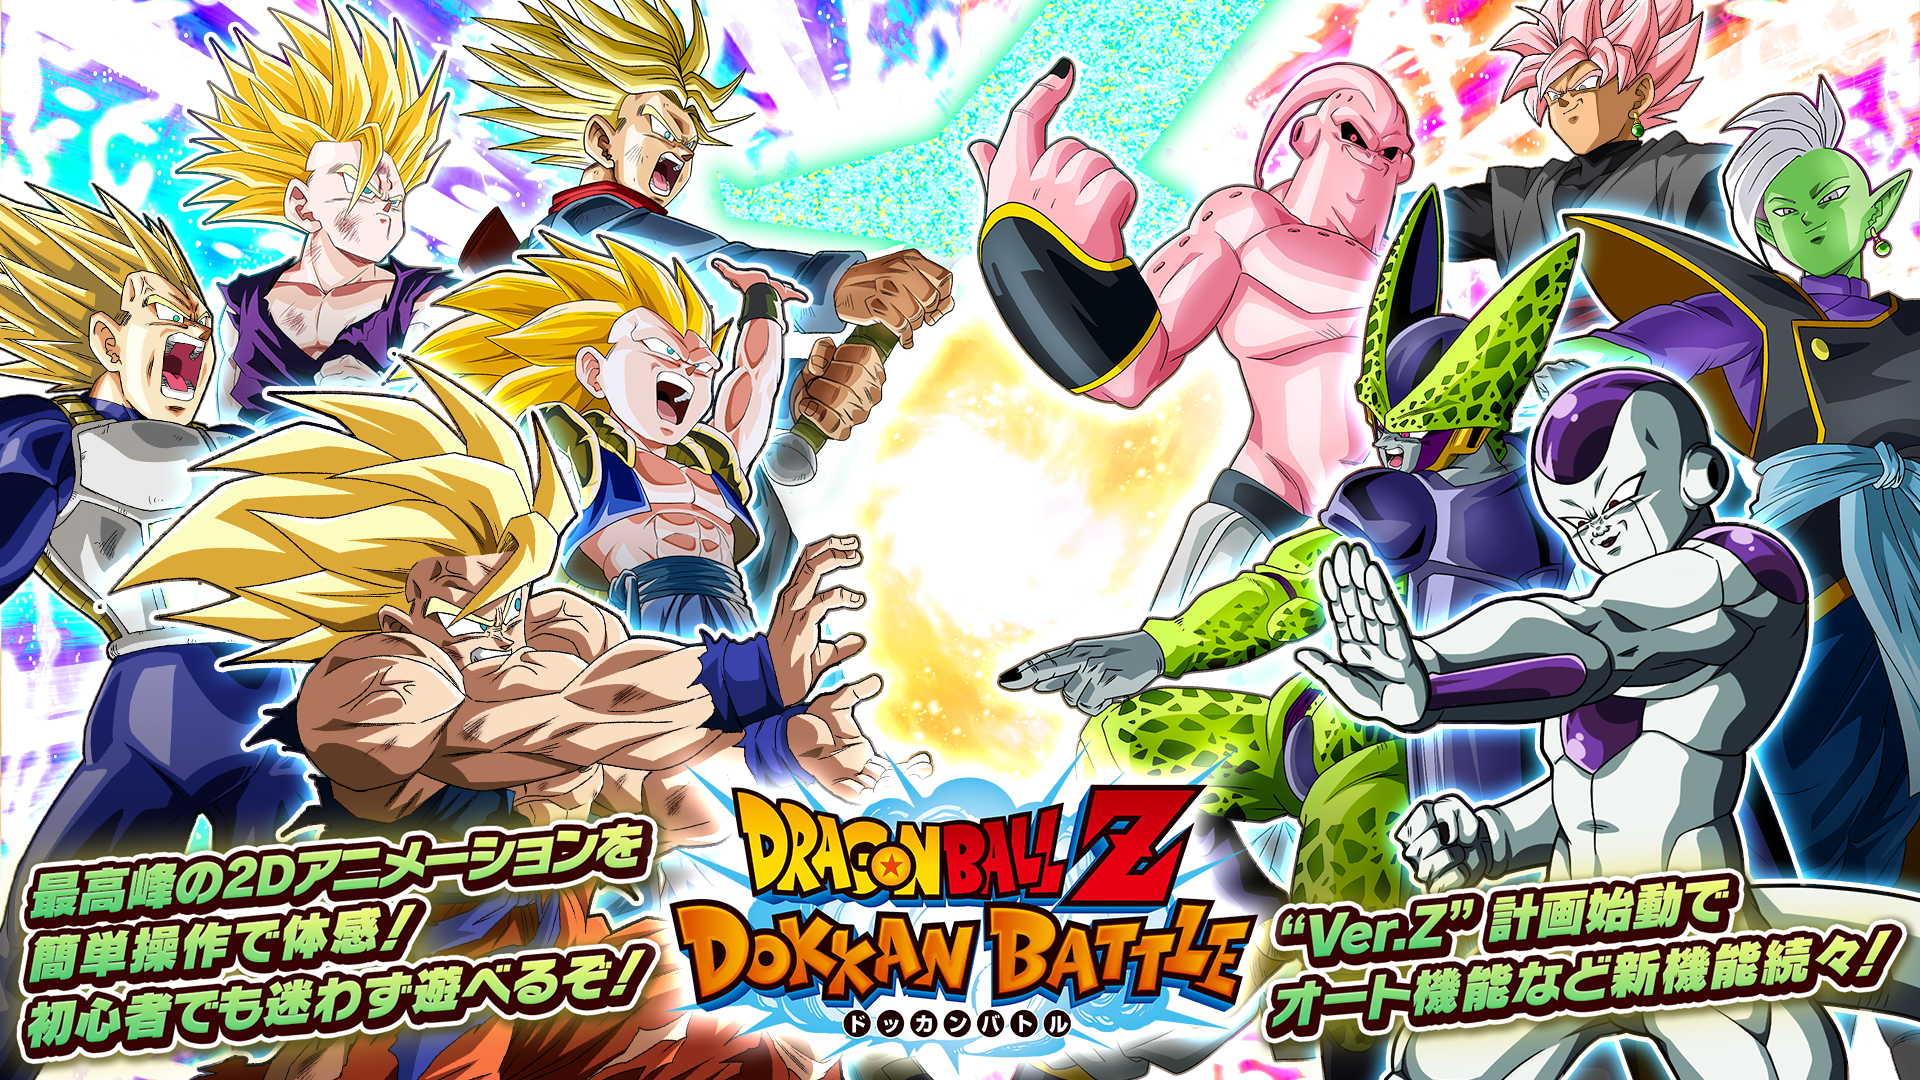 Dragon Ball Super - Manga BR Apk Download for Android- Latest